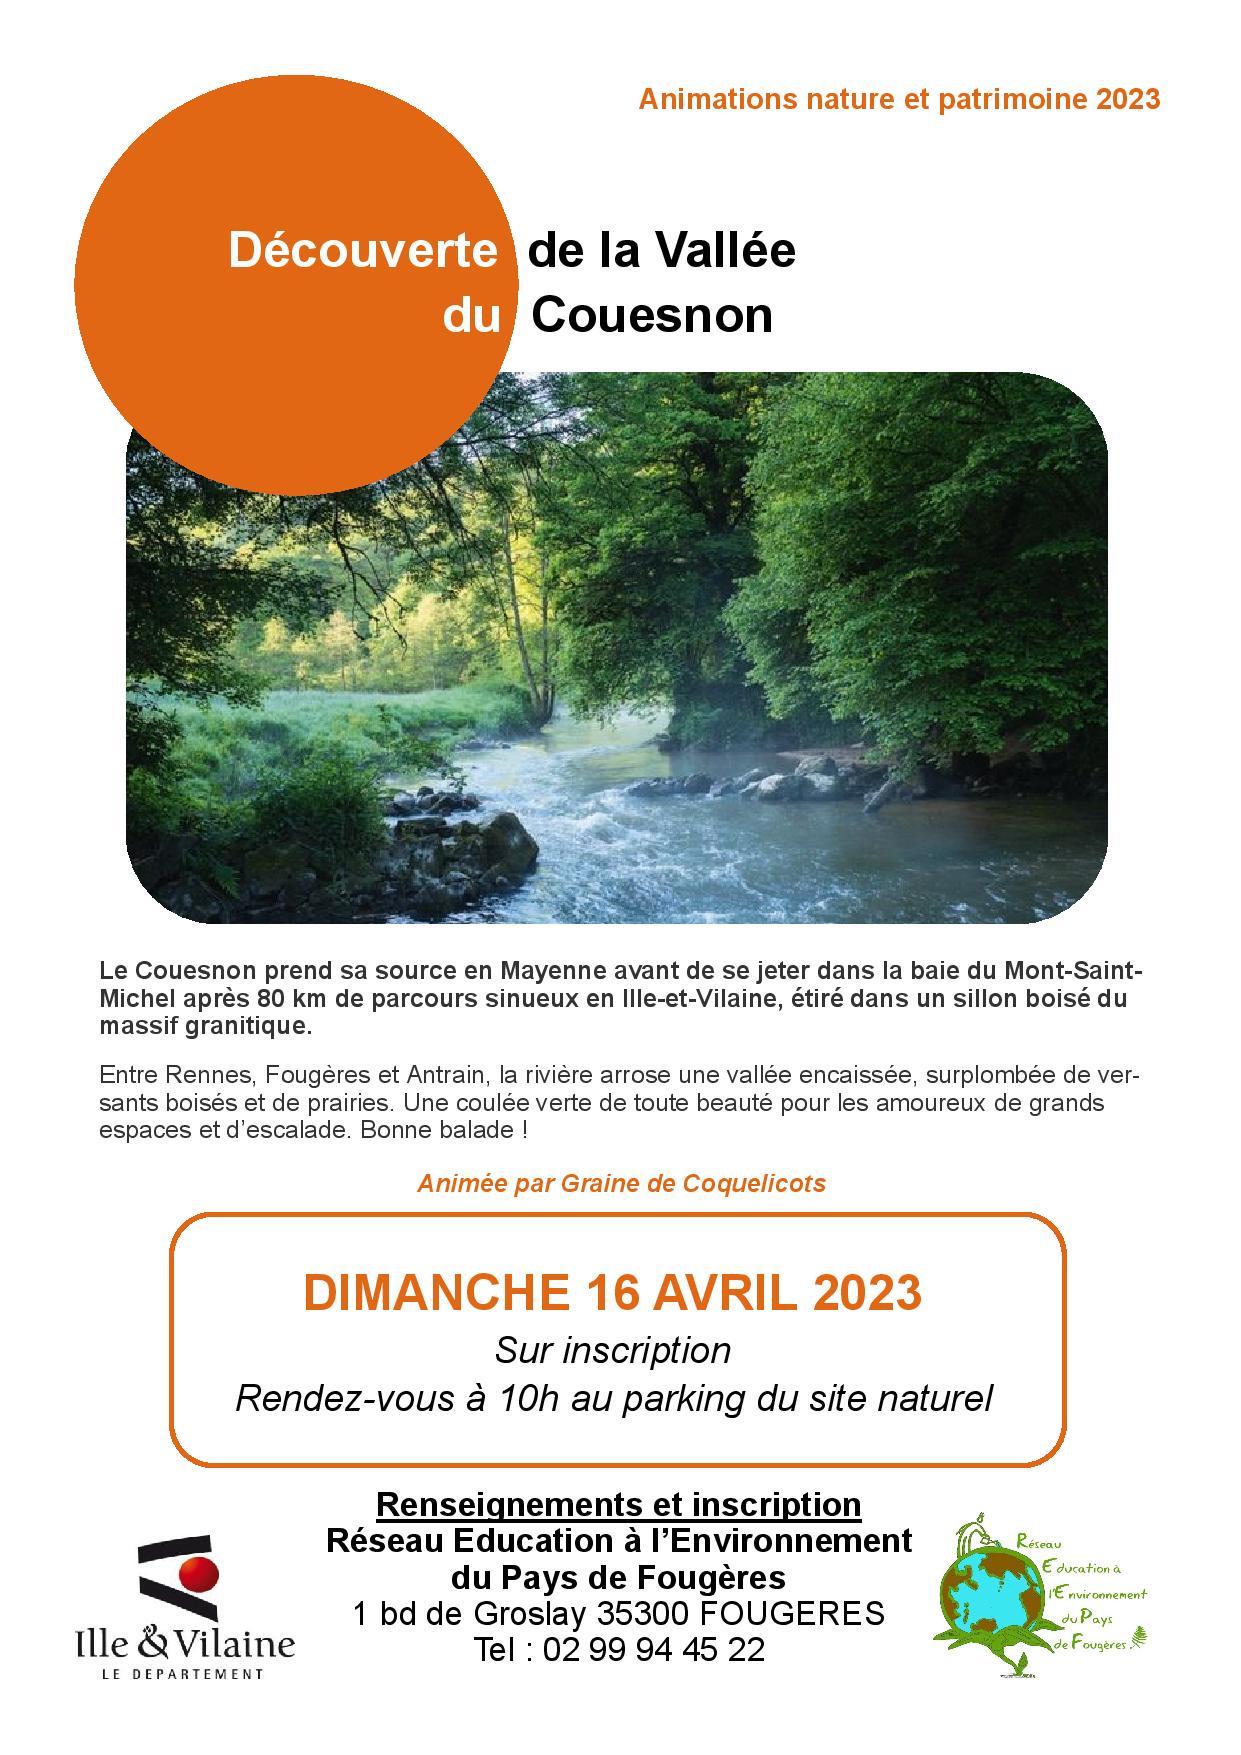 Balade vallee couesnon avril 2023